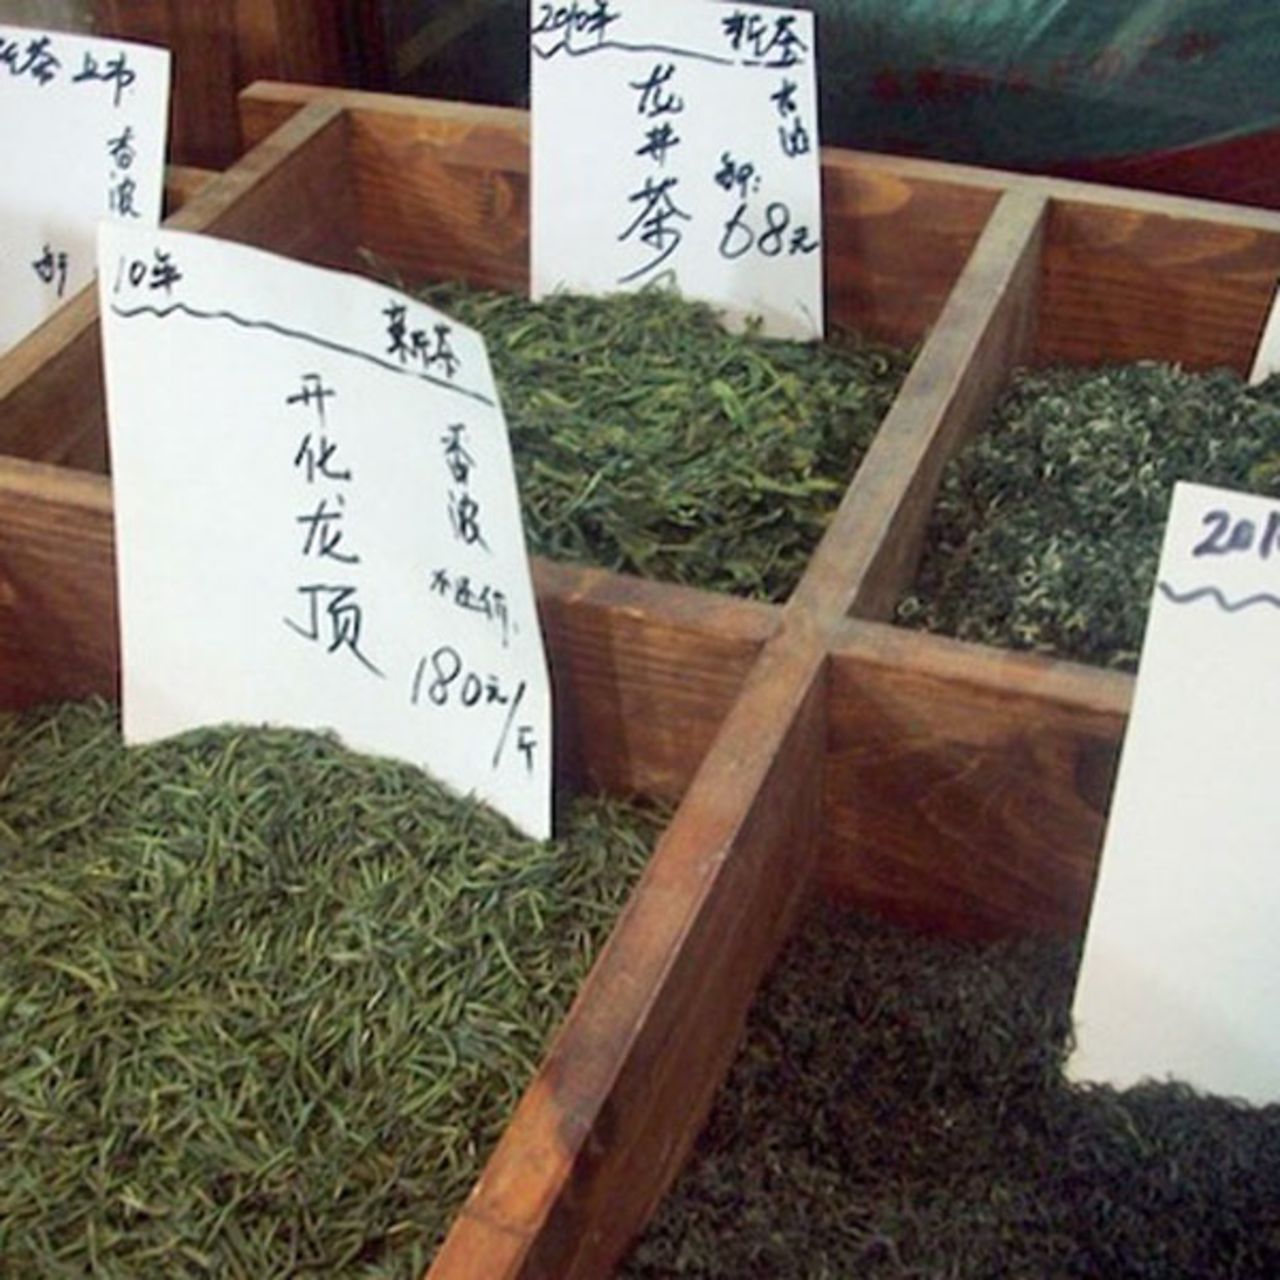 China grows some of the world's finest tea. If you can't <a href="http://edition.cnn.com/2014/06/22/travel/china-tea-travel/index.html?hpt=hp_c5">make it to the source</a>, Shanghai's Laoximen Tea Plaza houses a variety of specialty tea shops. 